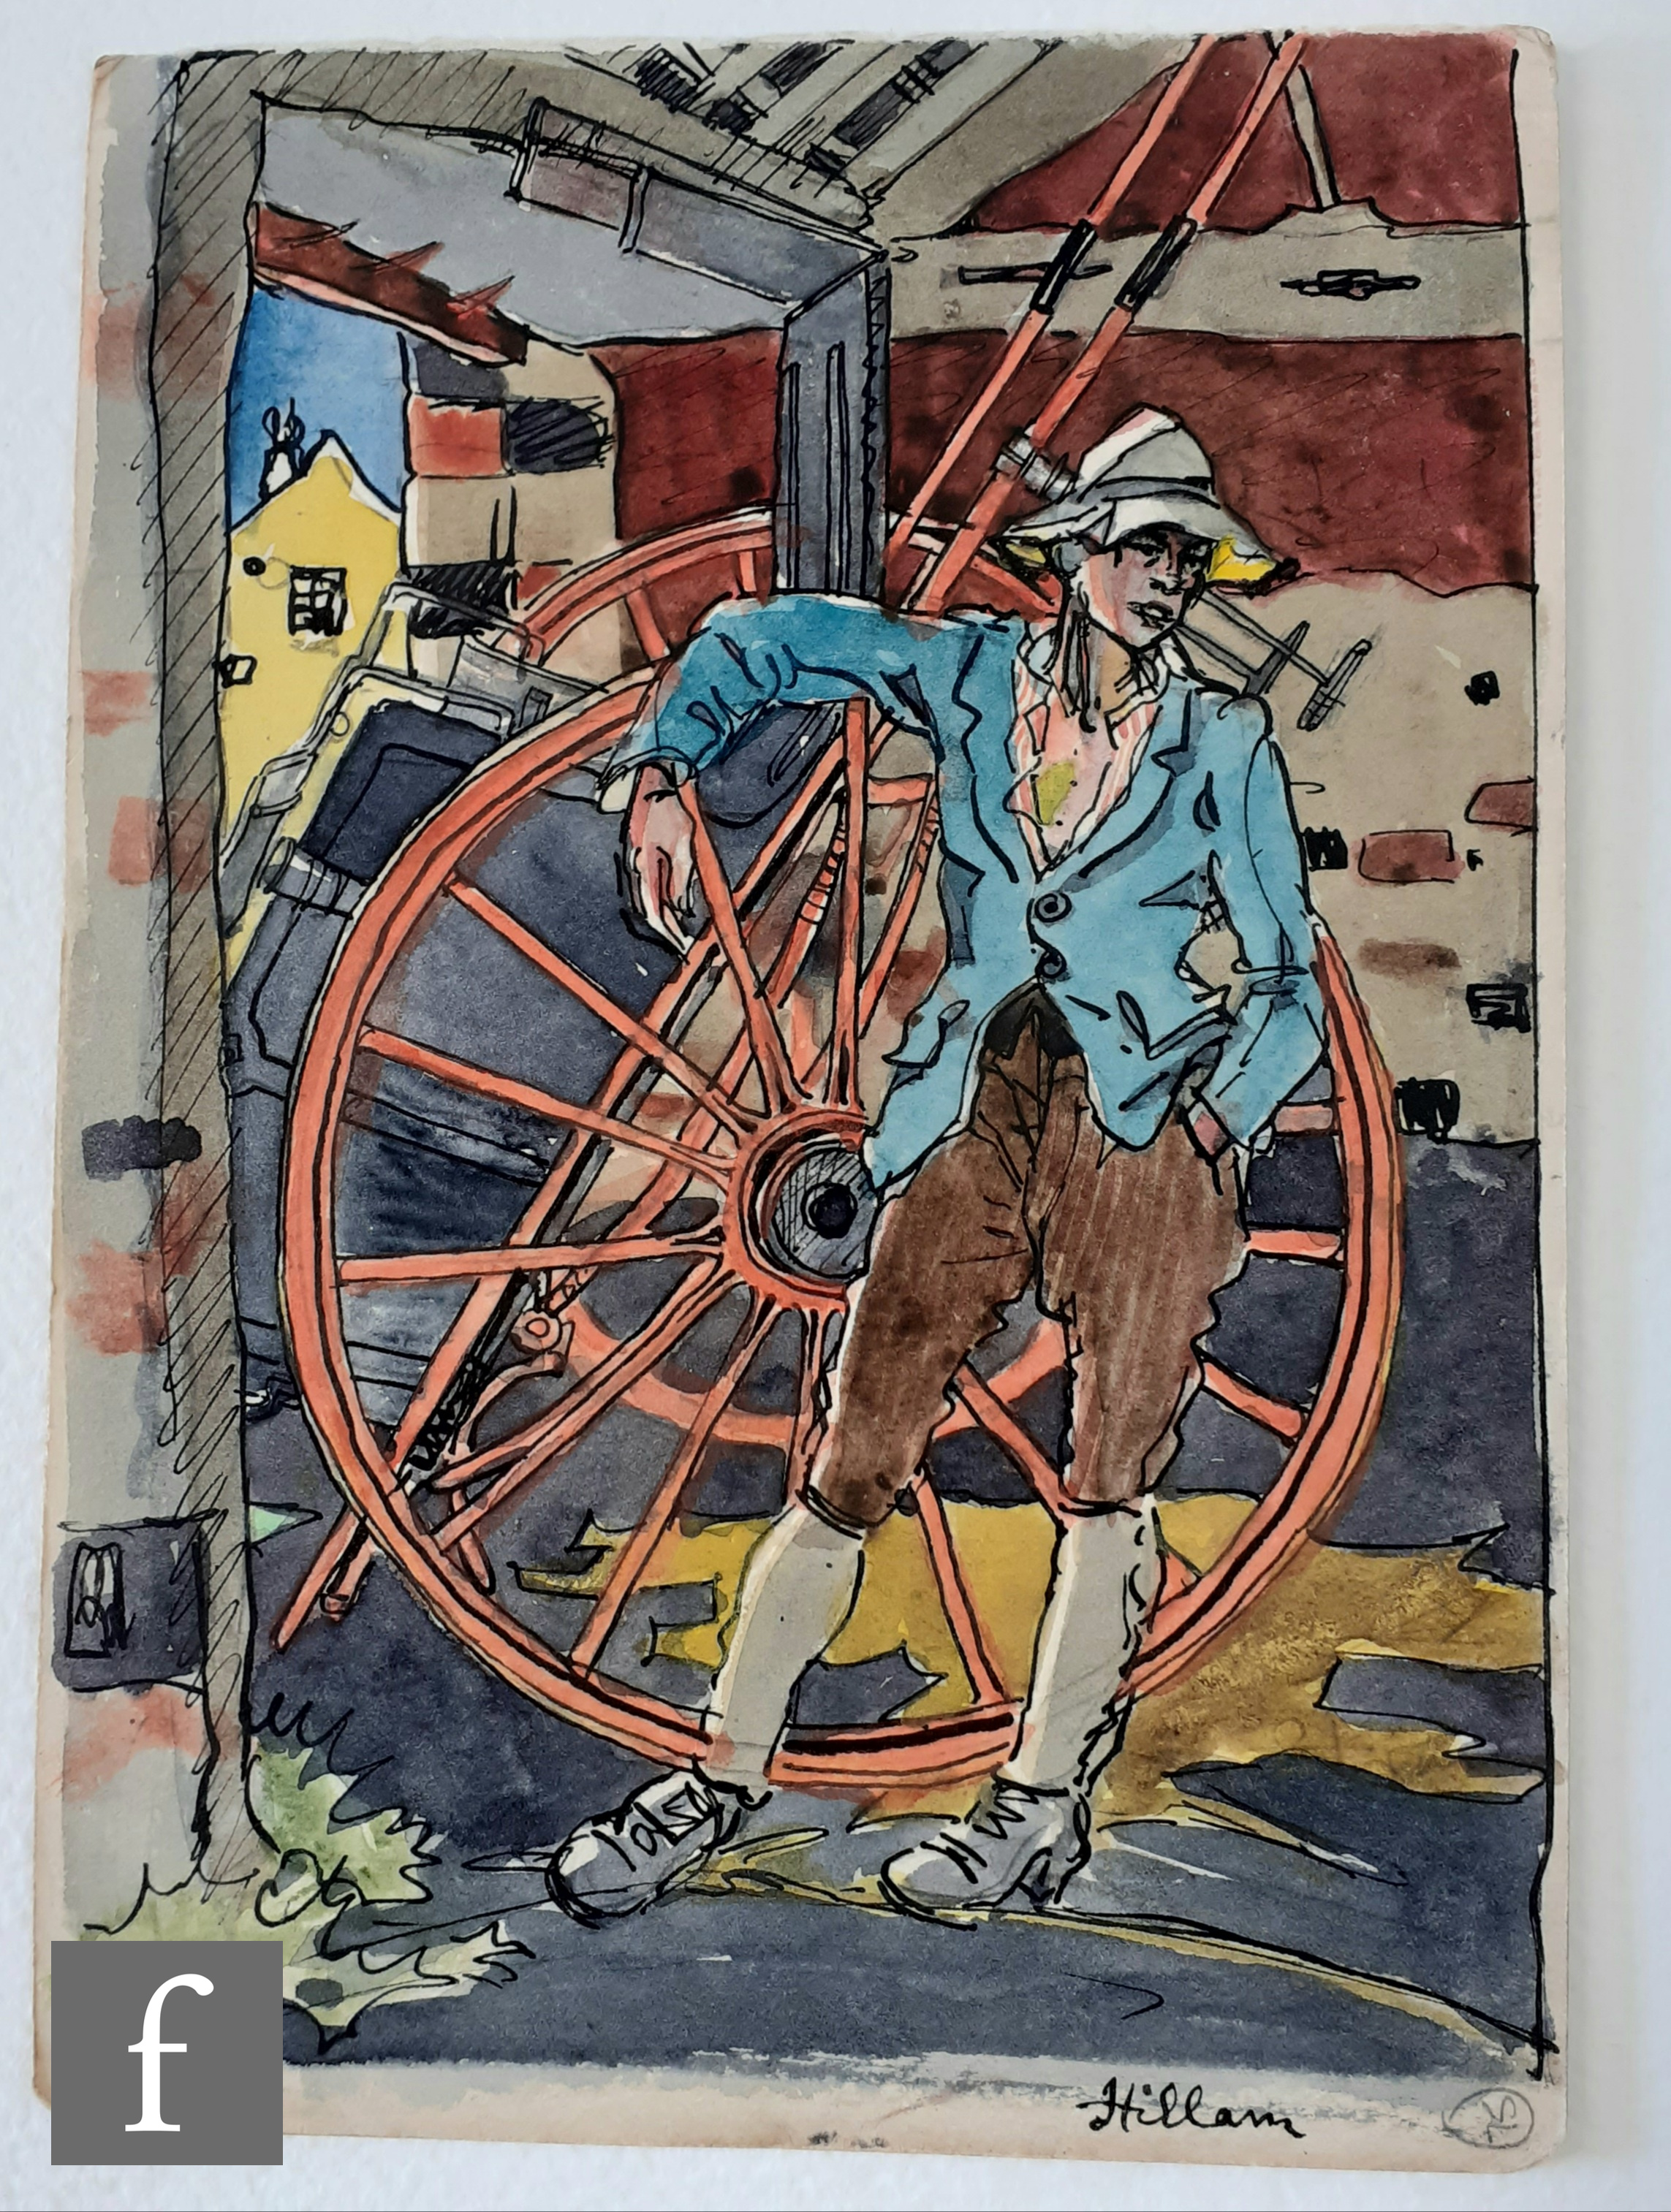 Albert Wainwright (1898-1943) - Hillam, a pen, ink and water colour painting depicting a young